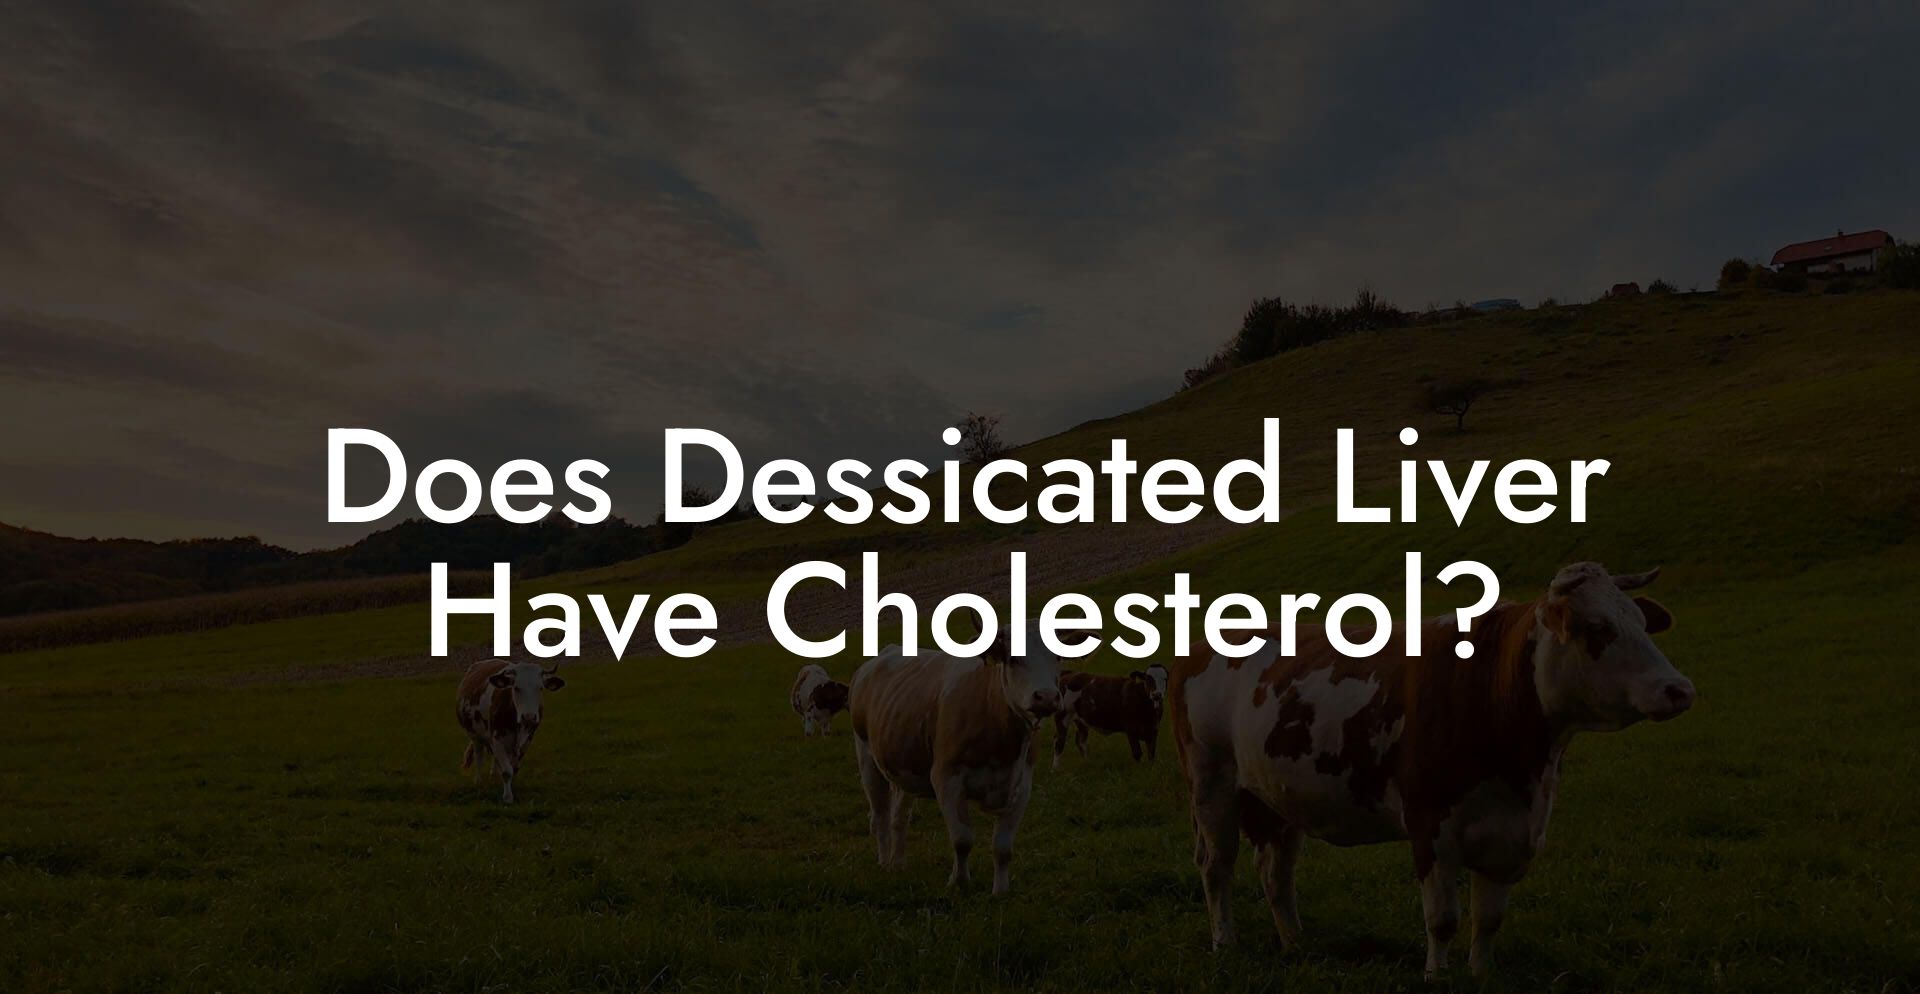 Does Dessicated Liver Have Cholesterol?